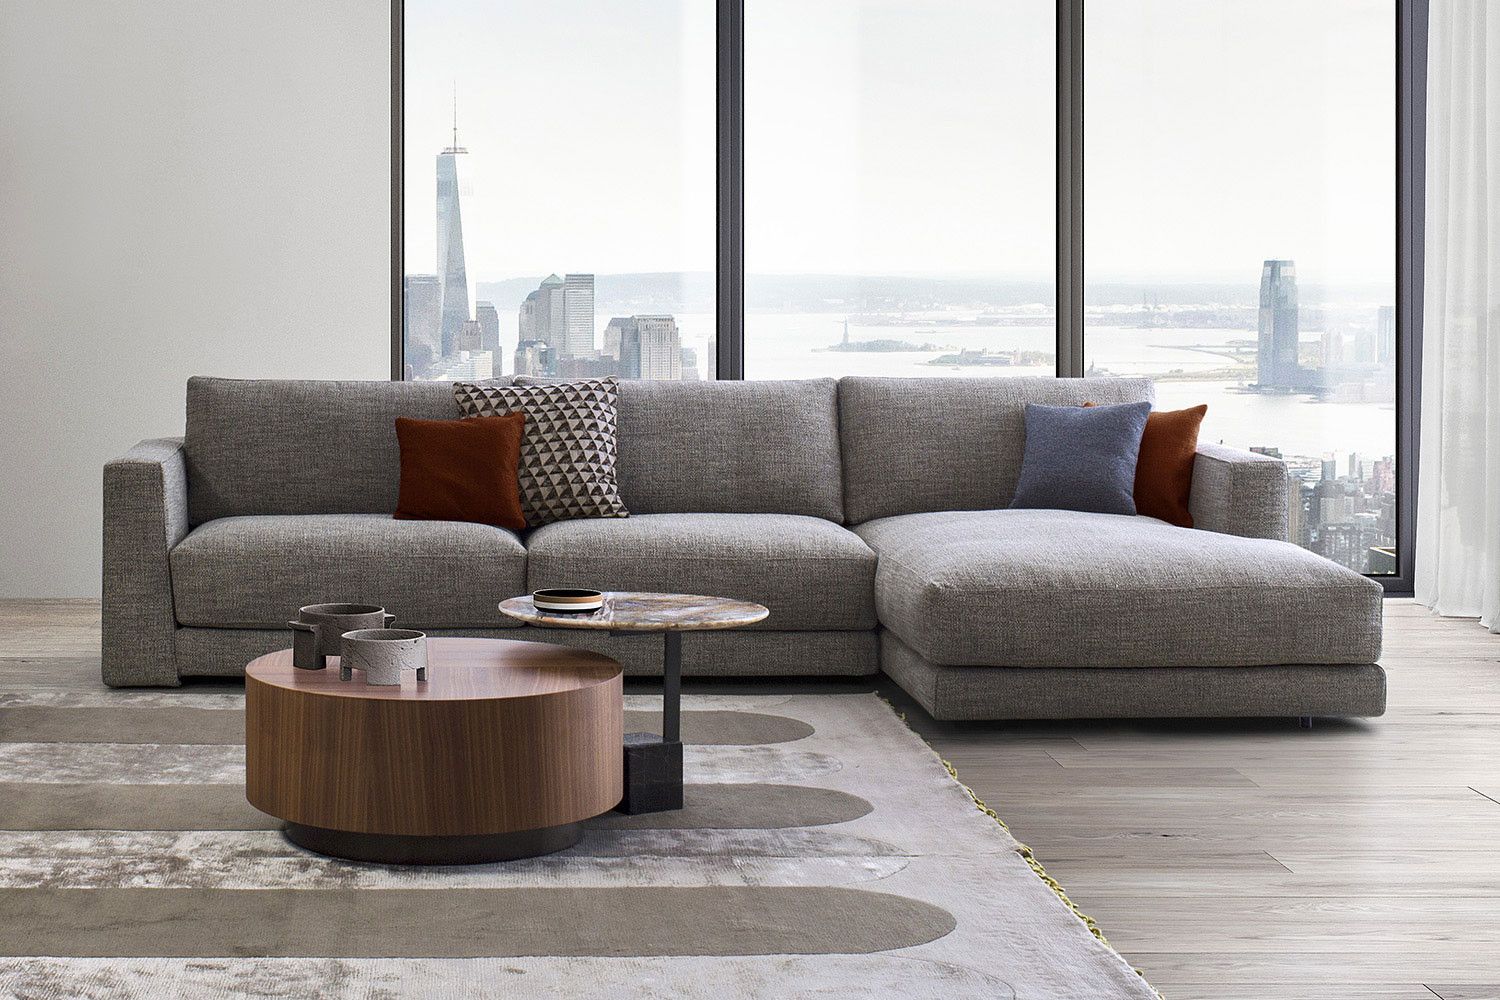 Italian 2 3 4+ Seater Sofas | Bodema Inside Sofas With Pillowback Wood Bases (View 11 of 15)